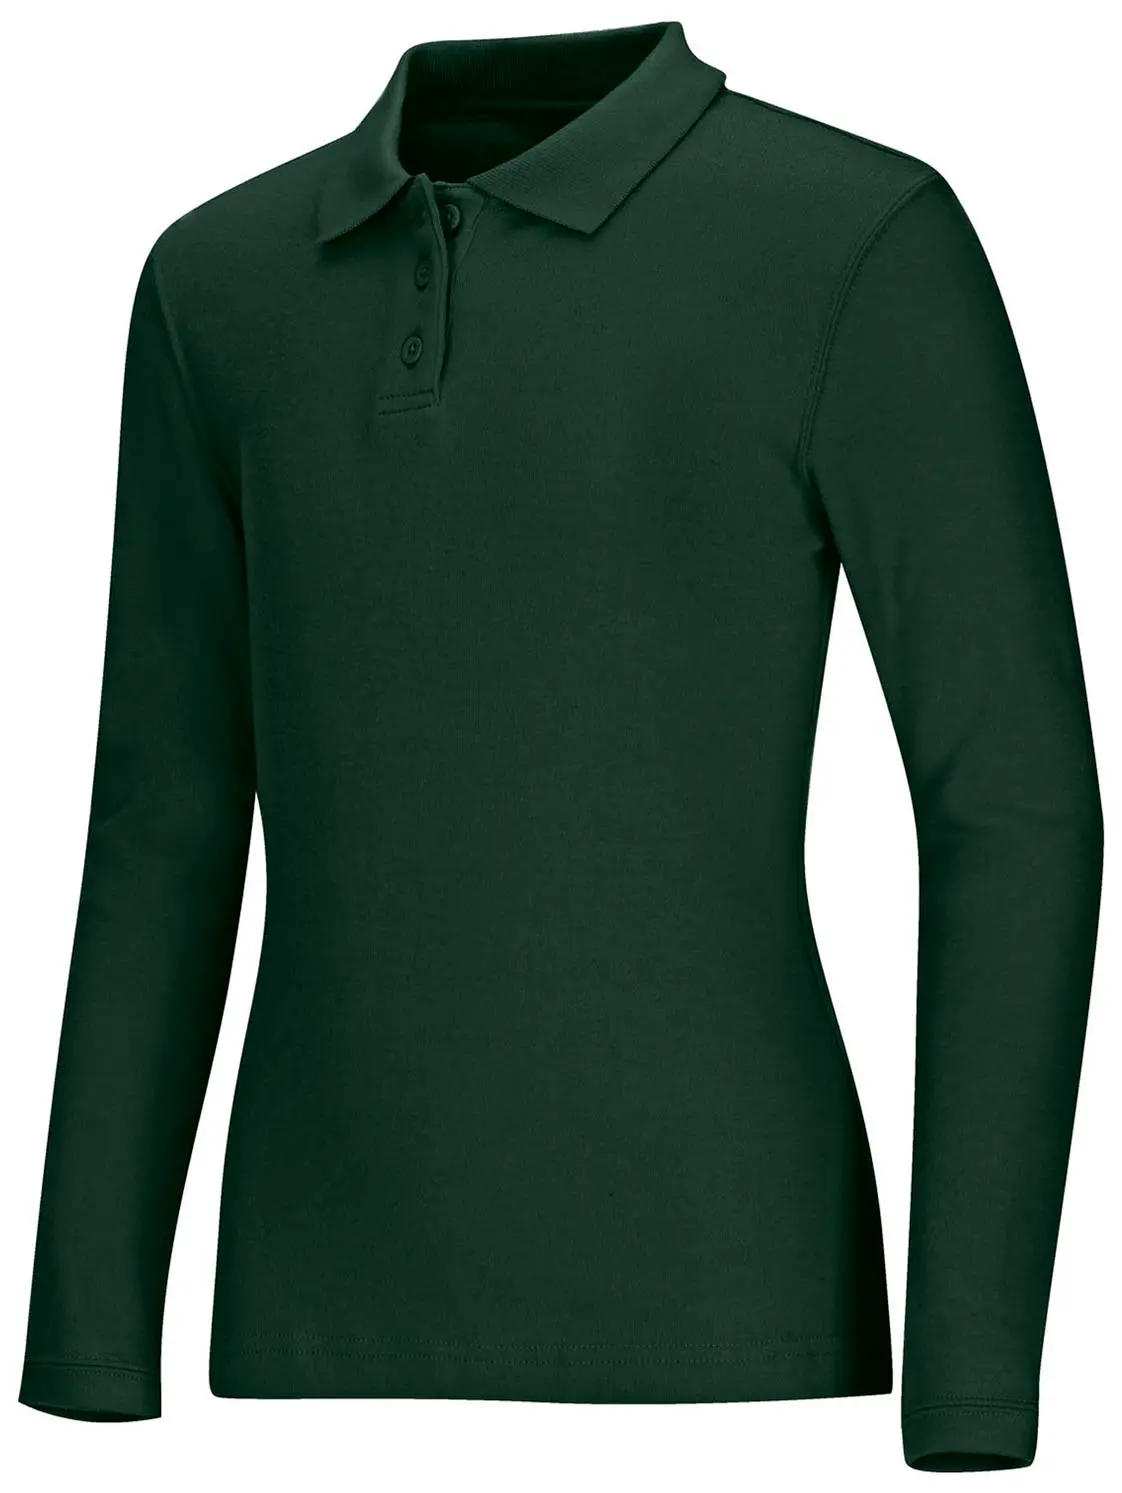 Girls Long Sleeve Fitted Interlock Polo